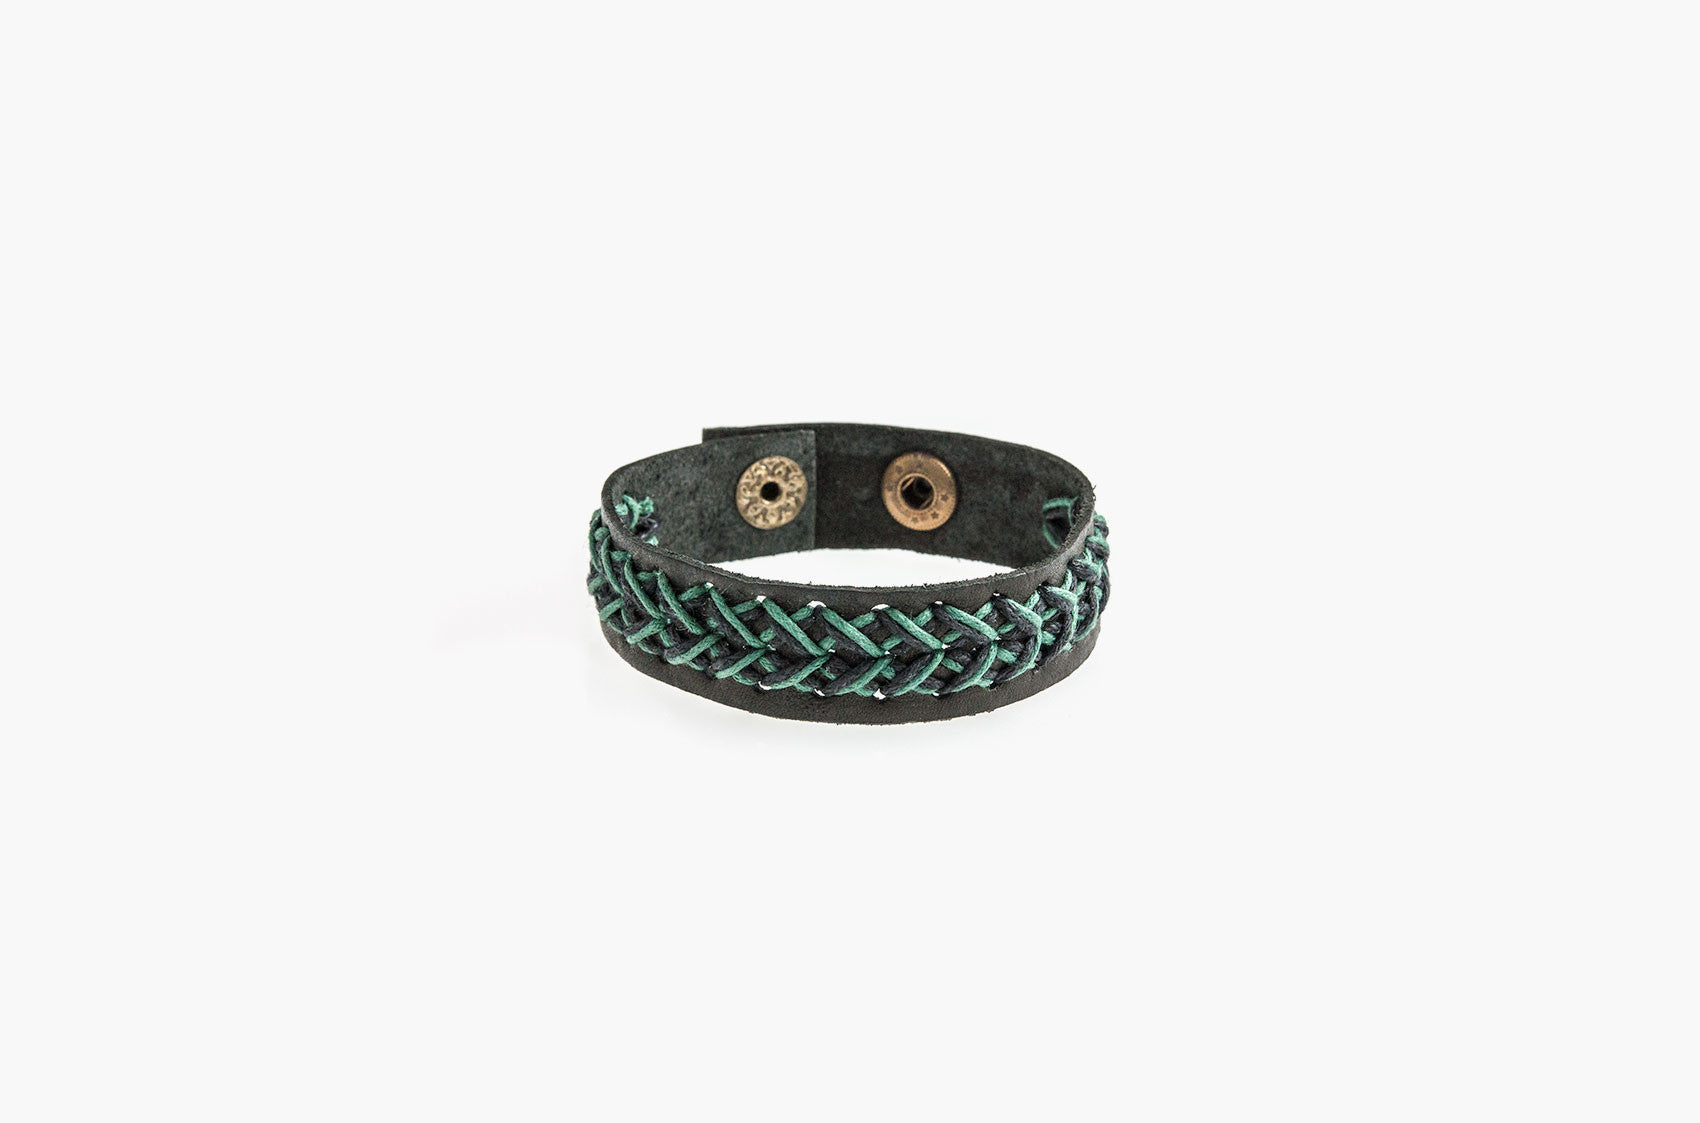 Black leather and green cord stitched bracelet